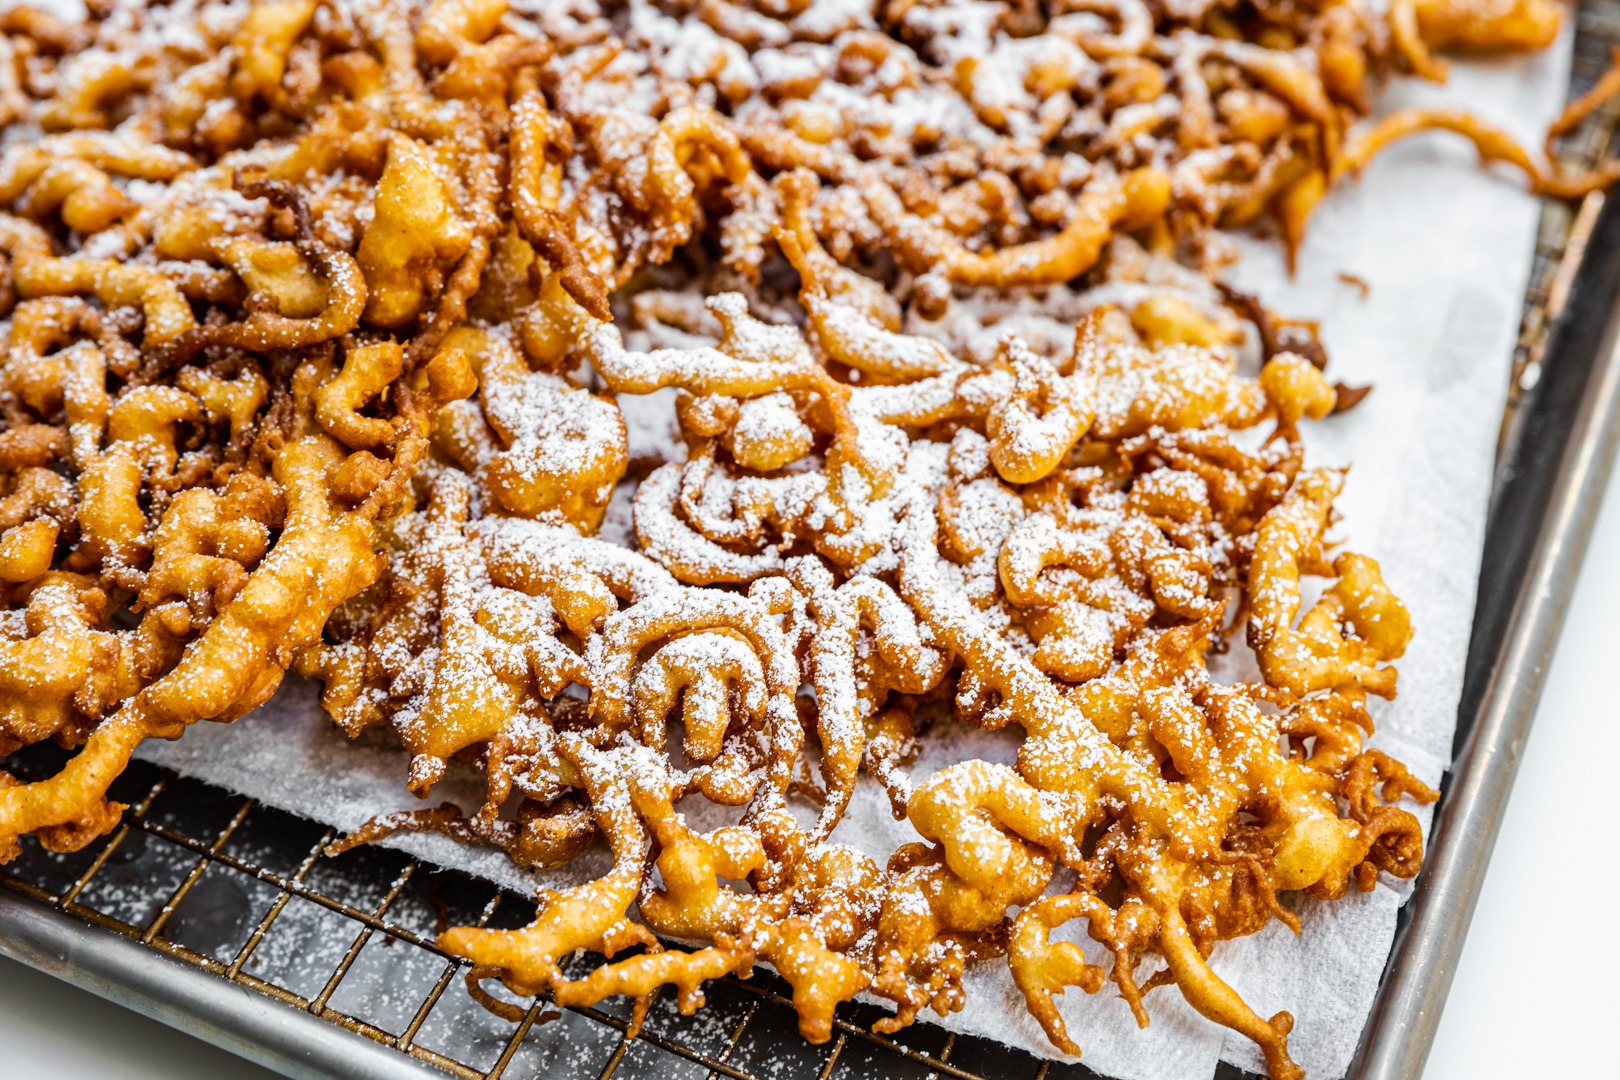 Funnel cakes